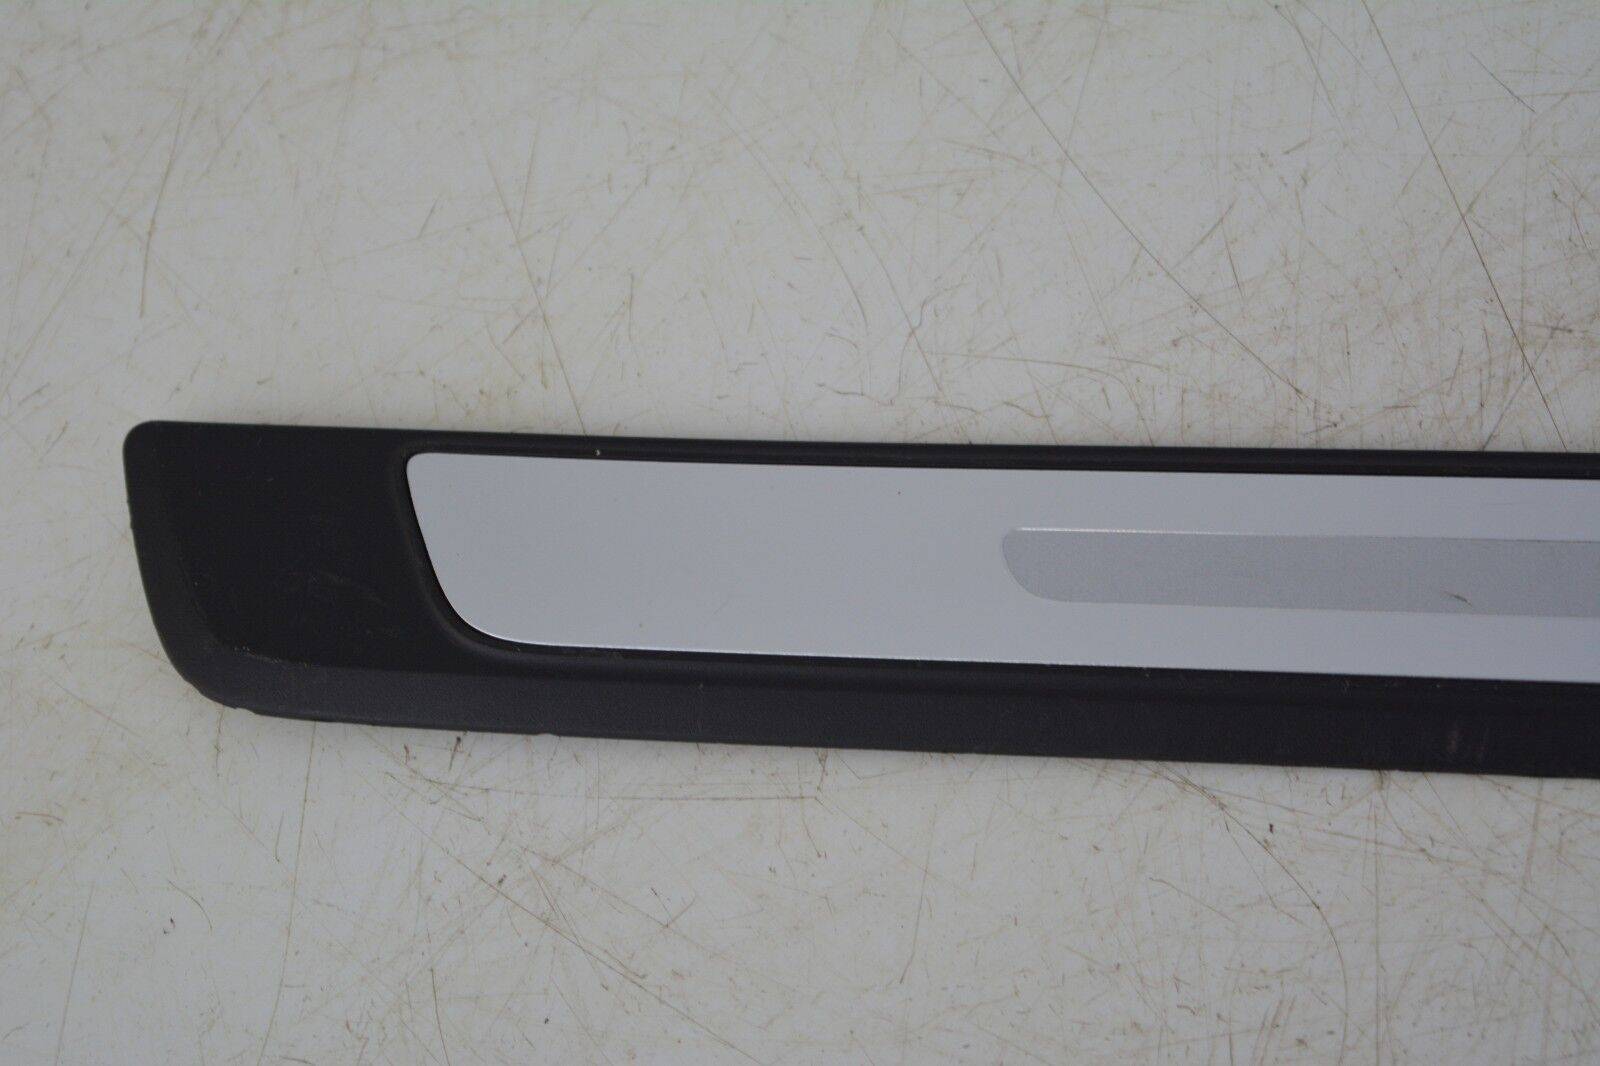 Audi-A4-Door-Sill-Entry-Trim-Front-Left-8W0853373F-Genuine-176469540383-5